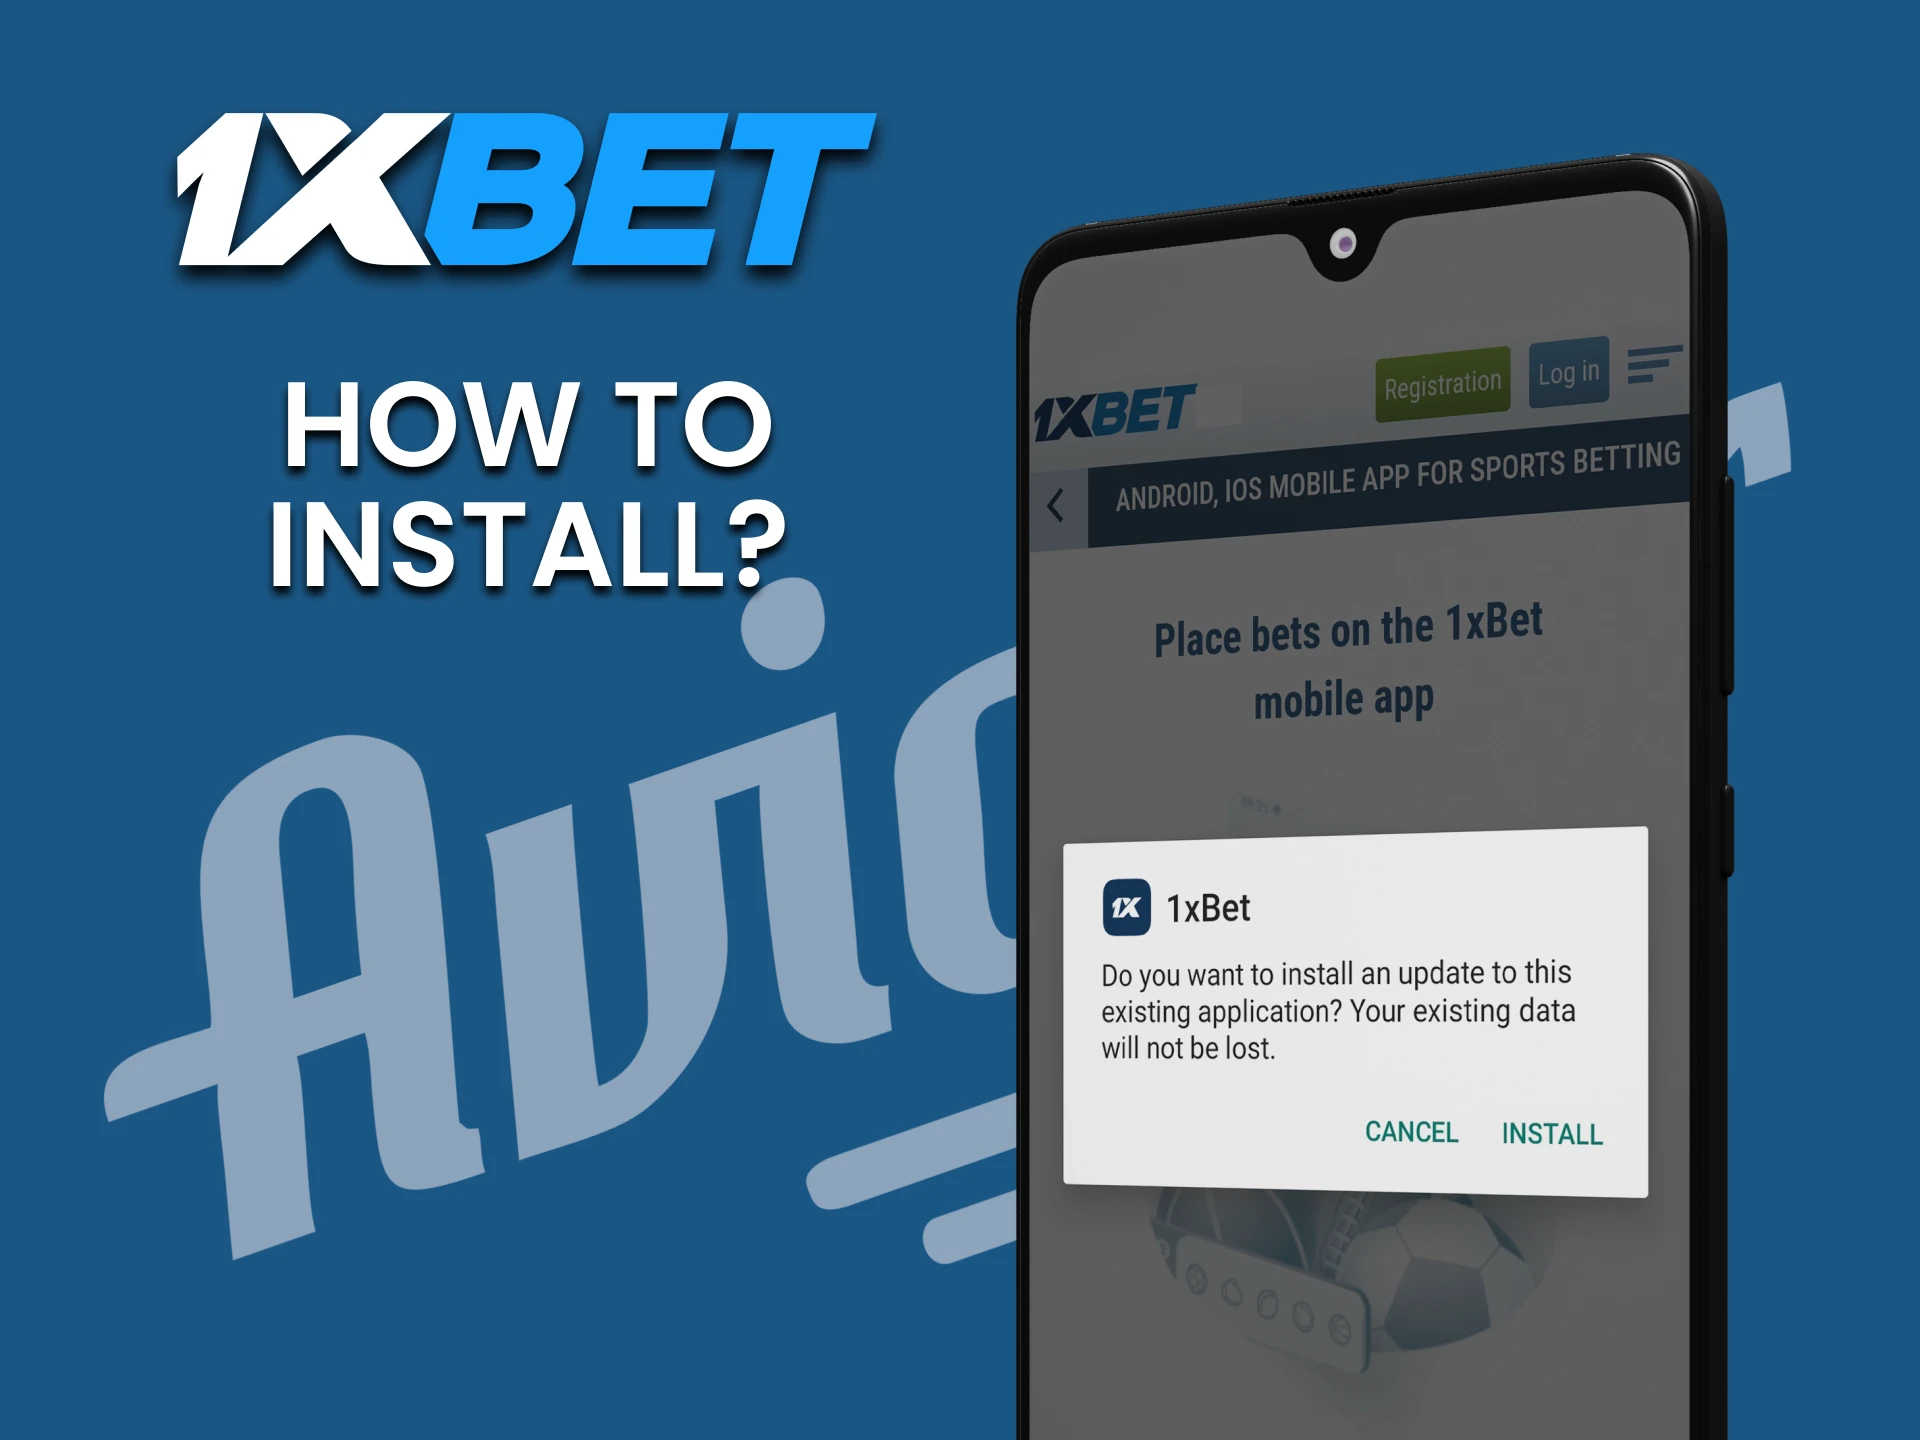 We will show you how to install the 1xbet application to play Aviator.